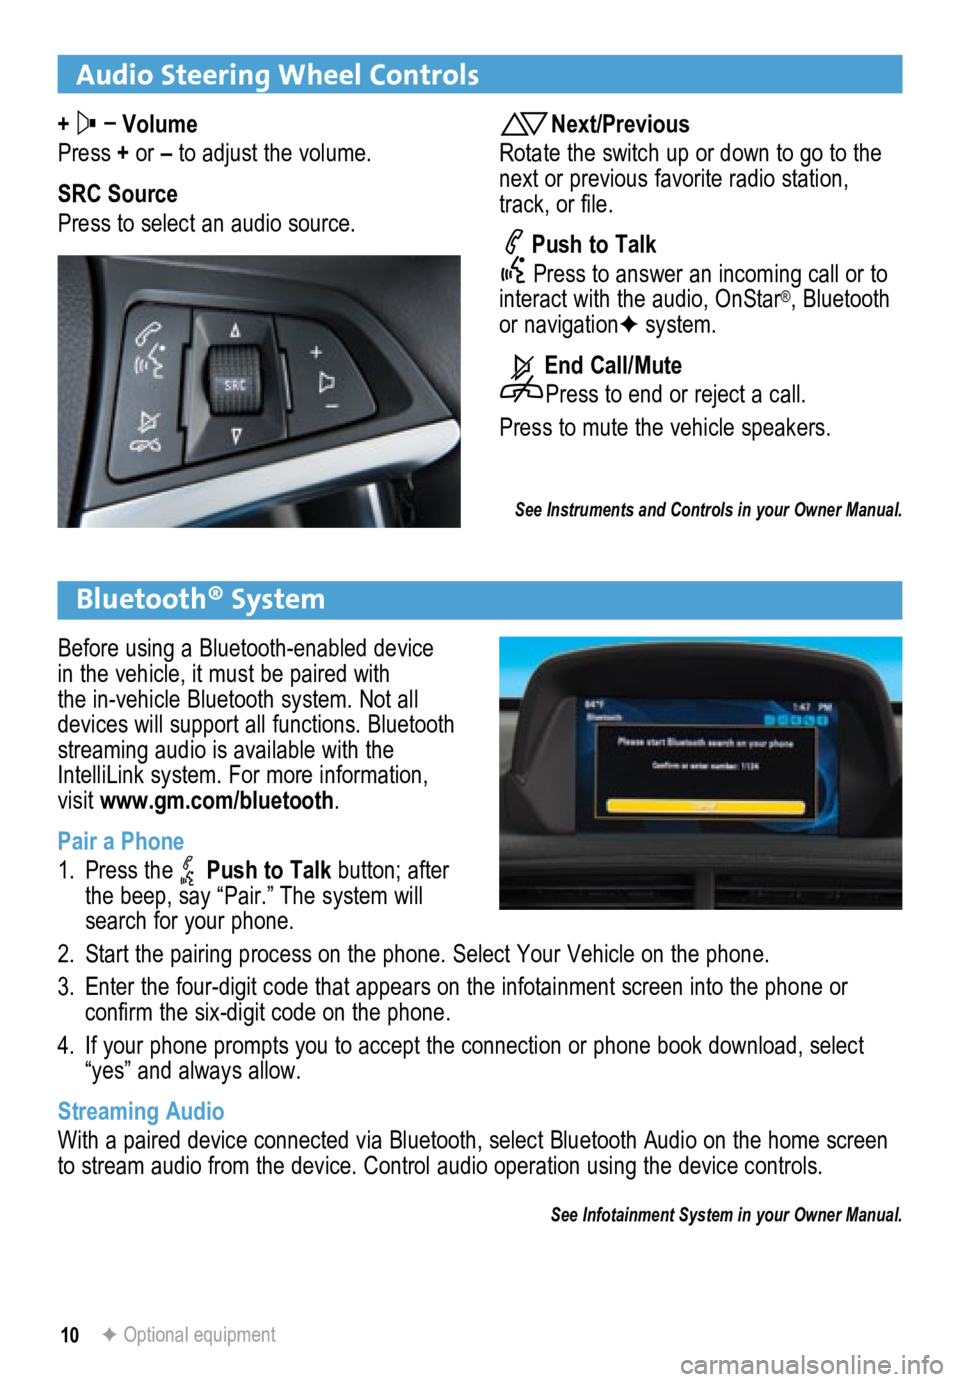 BUICK ENCORE 2013  Get To Know Guide 10
Audio Steering Wheel Controls
+  –
 Volume
Press  + or – to adjust the volume.
SRC Source
Press to select an audio source.Next/Previous
Rotate the switch up or down to go to the 
next or previo